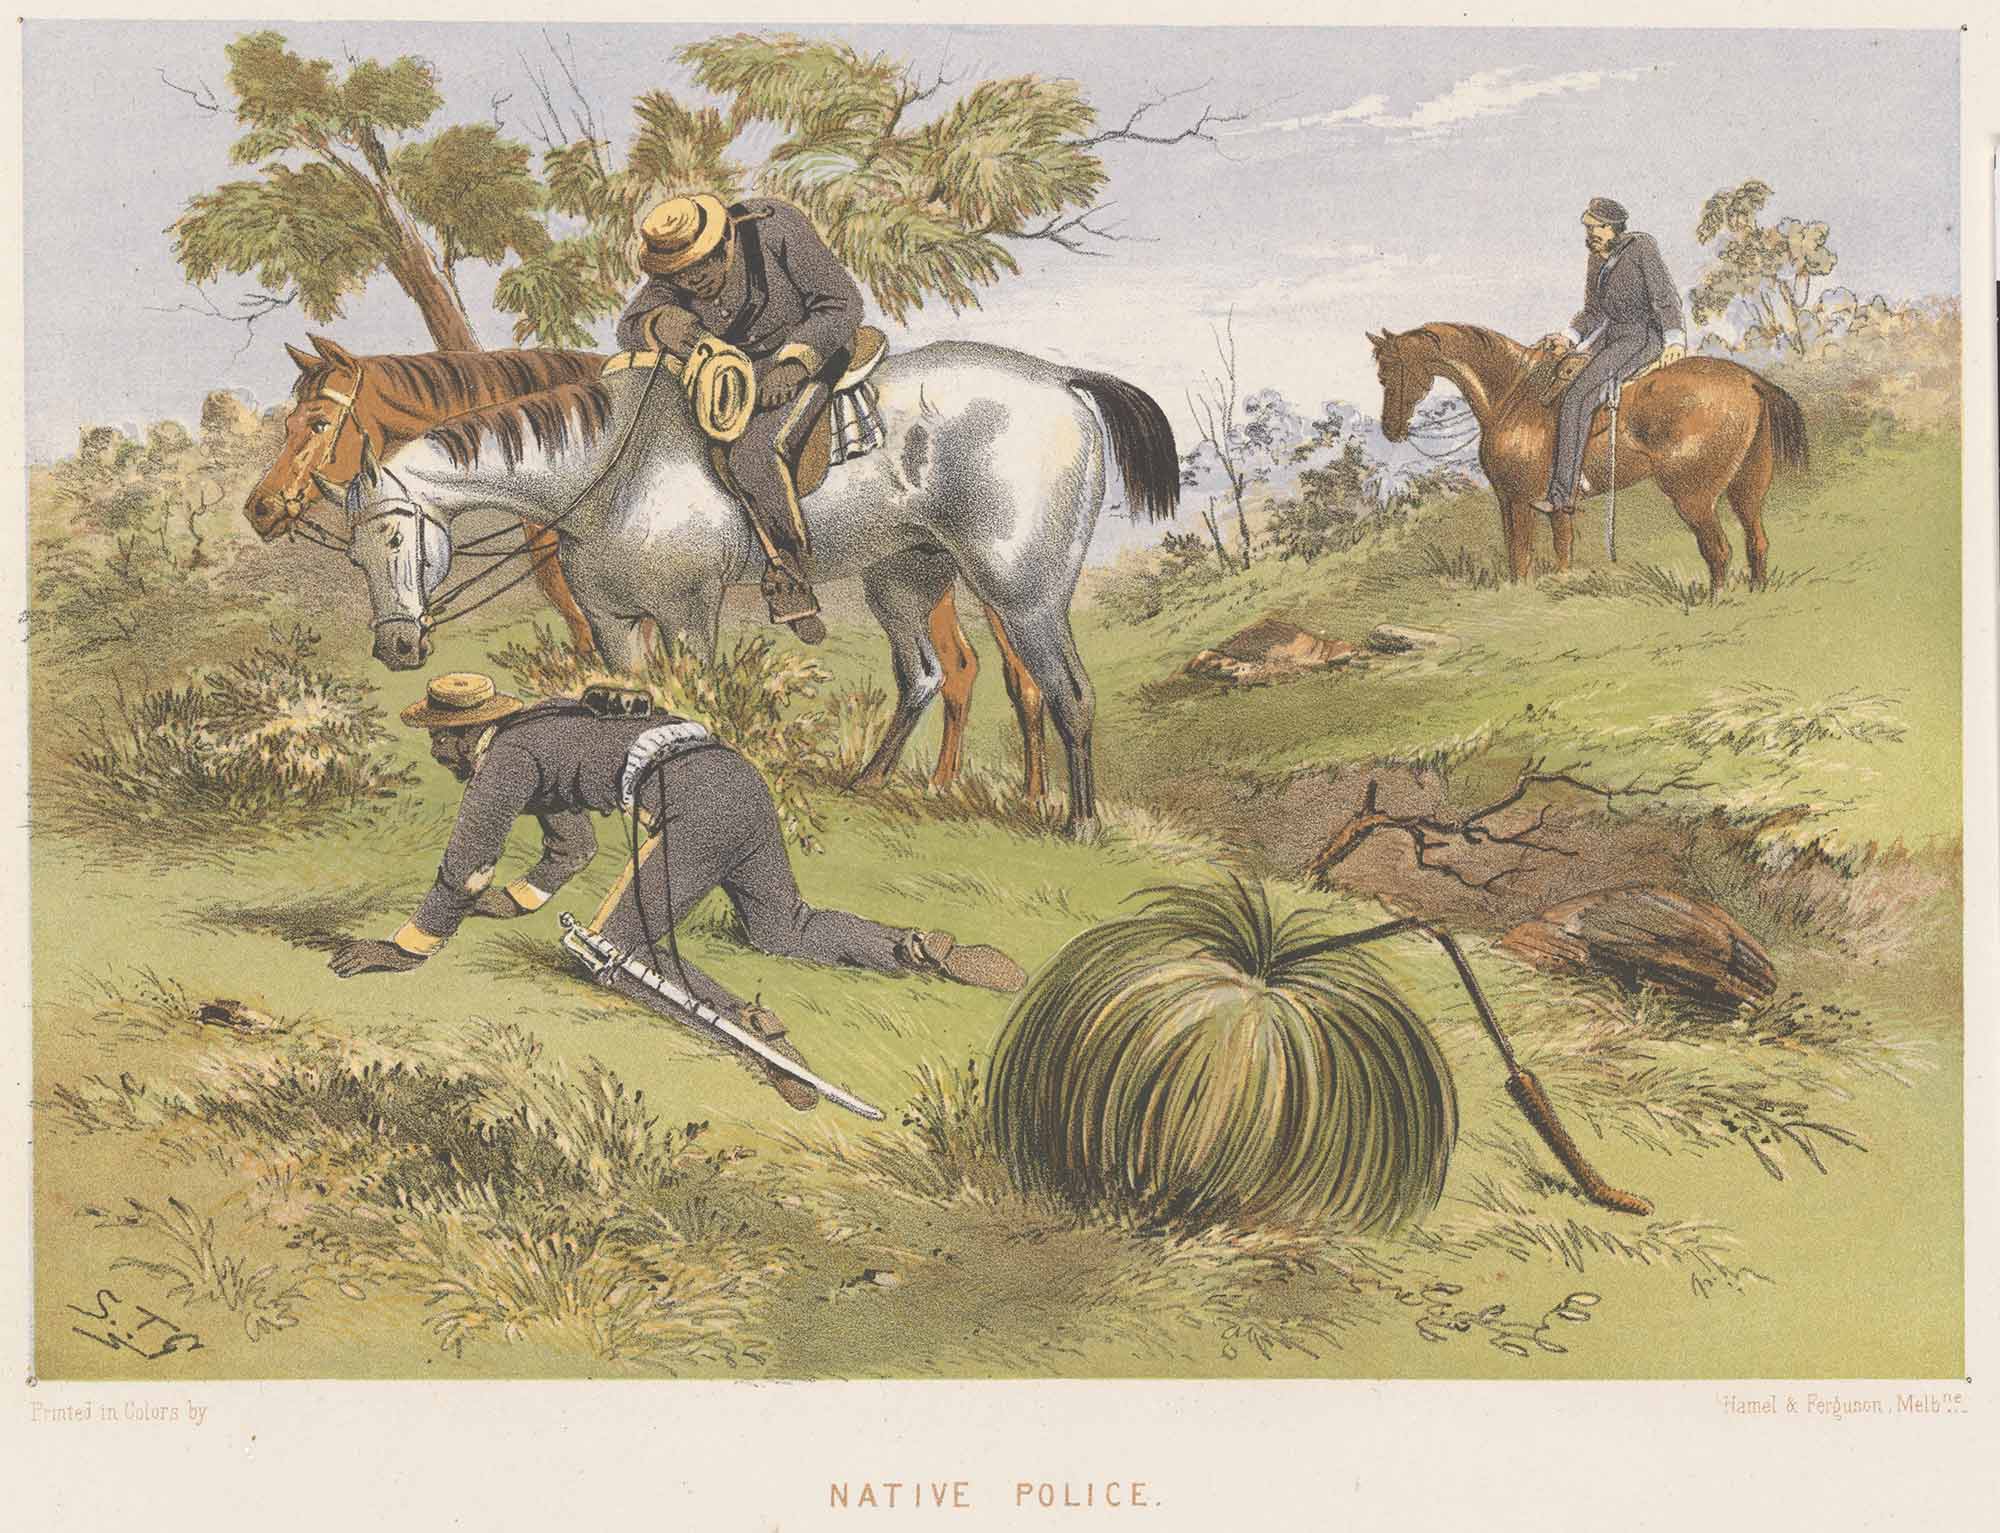 Artwork featuring men dressed in official uniforms on horseback in bushland. One man is on his hands and knees inspecting the ground.